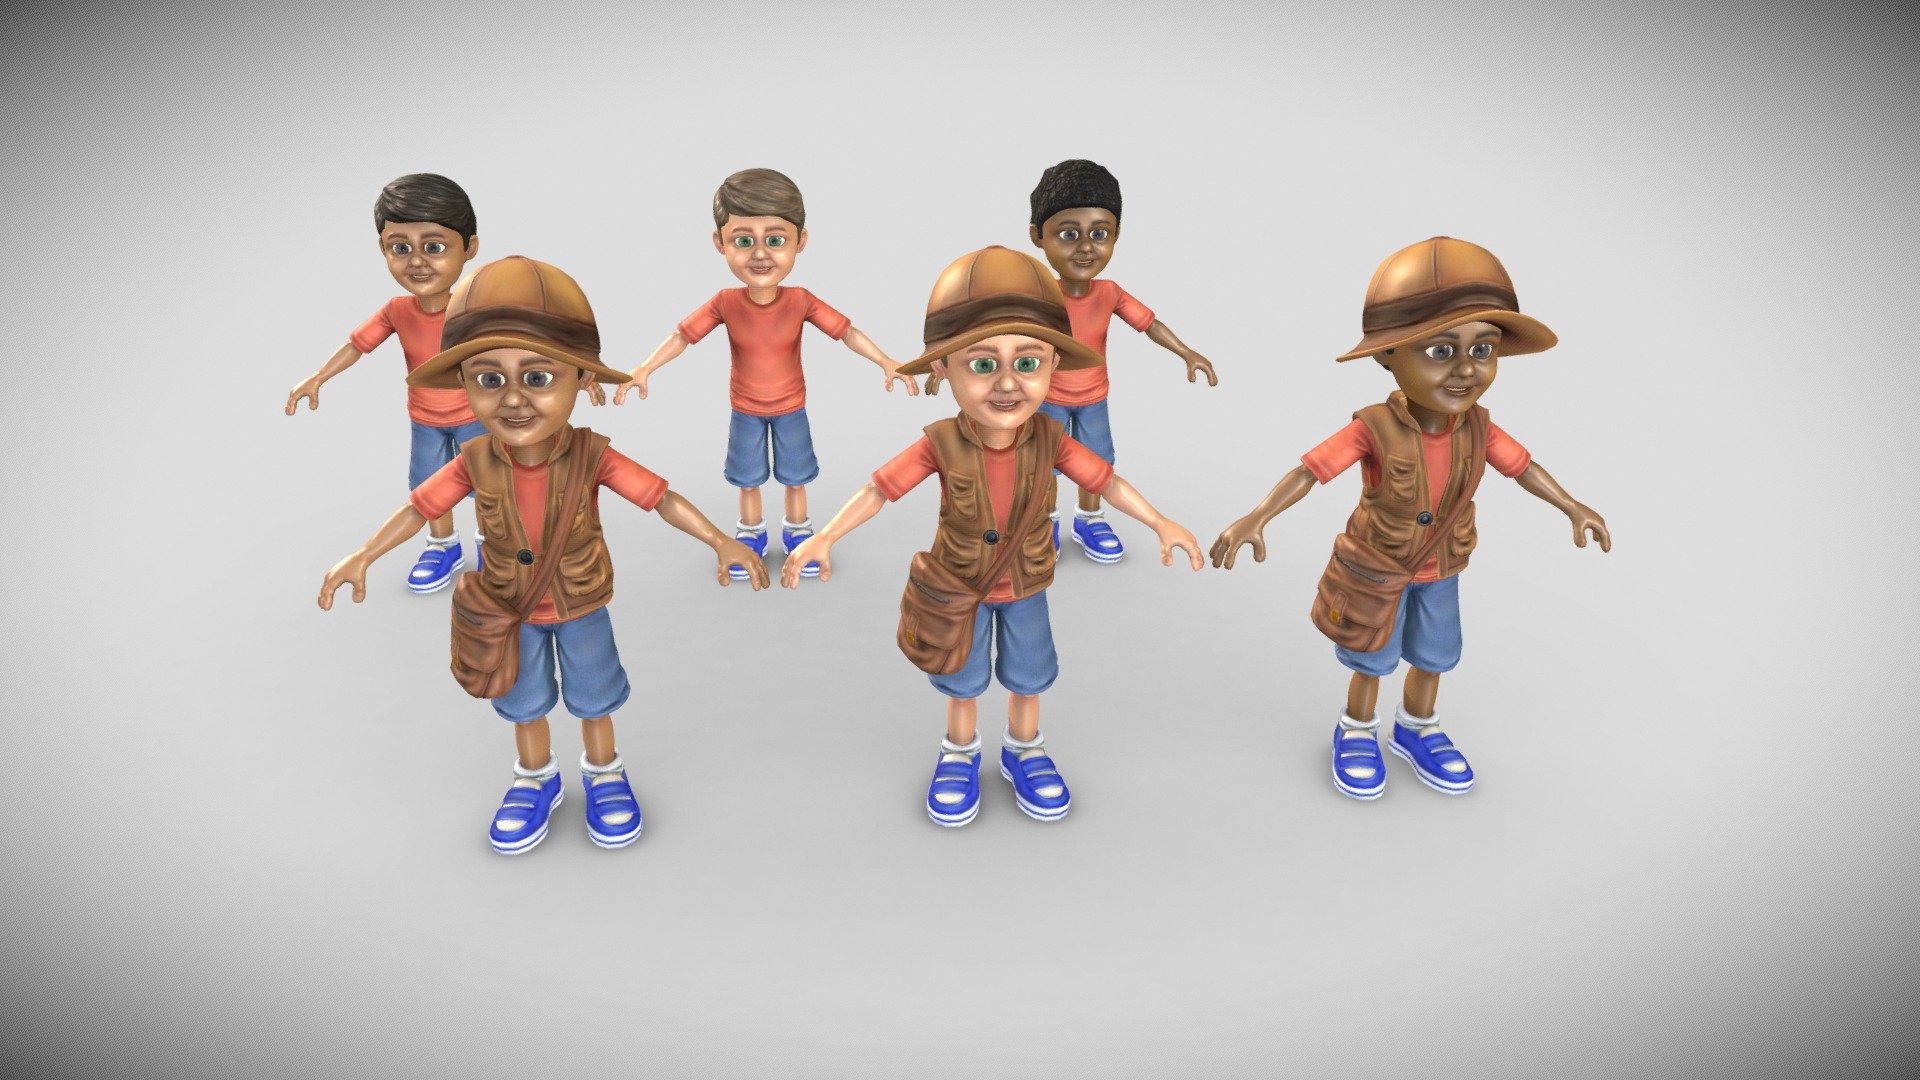 A child (Boy) model dressed for exploring. White, Latino, and Black versions included.

Color, Specular/Gloss, Occlusion, and Normal maps are 4096.

Collada, FBX, and OBJ formats included 3d model